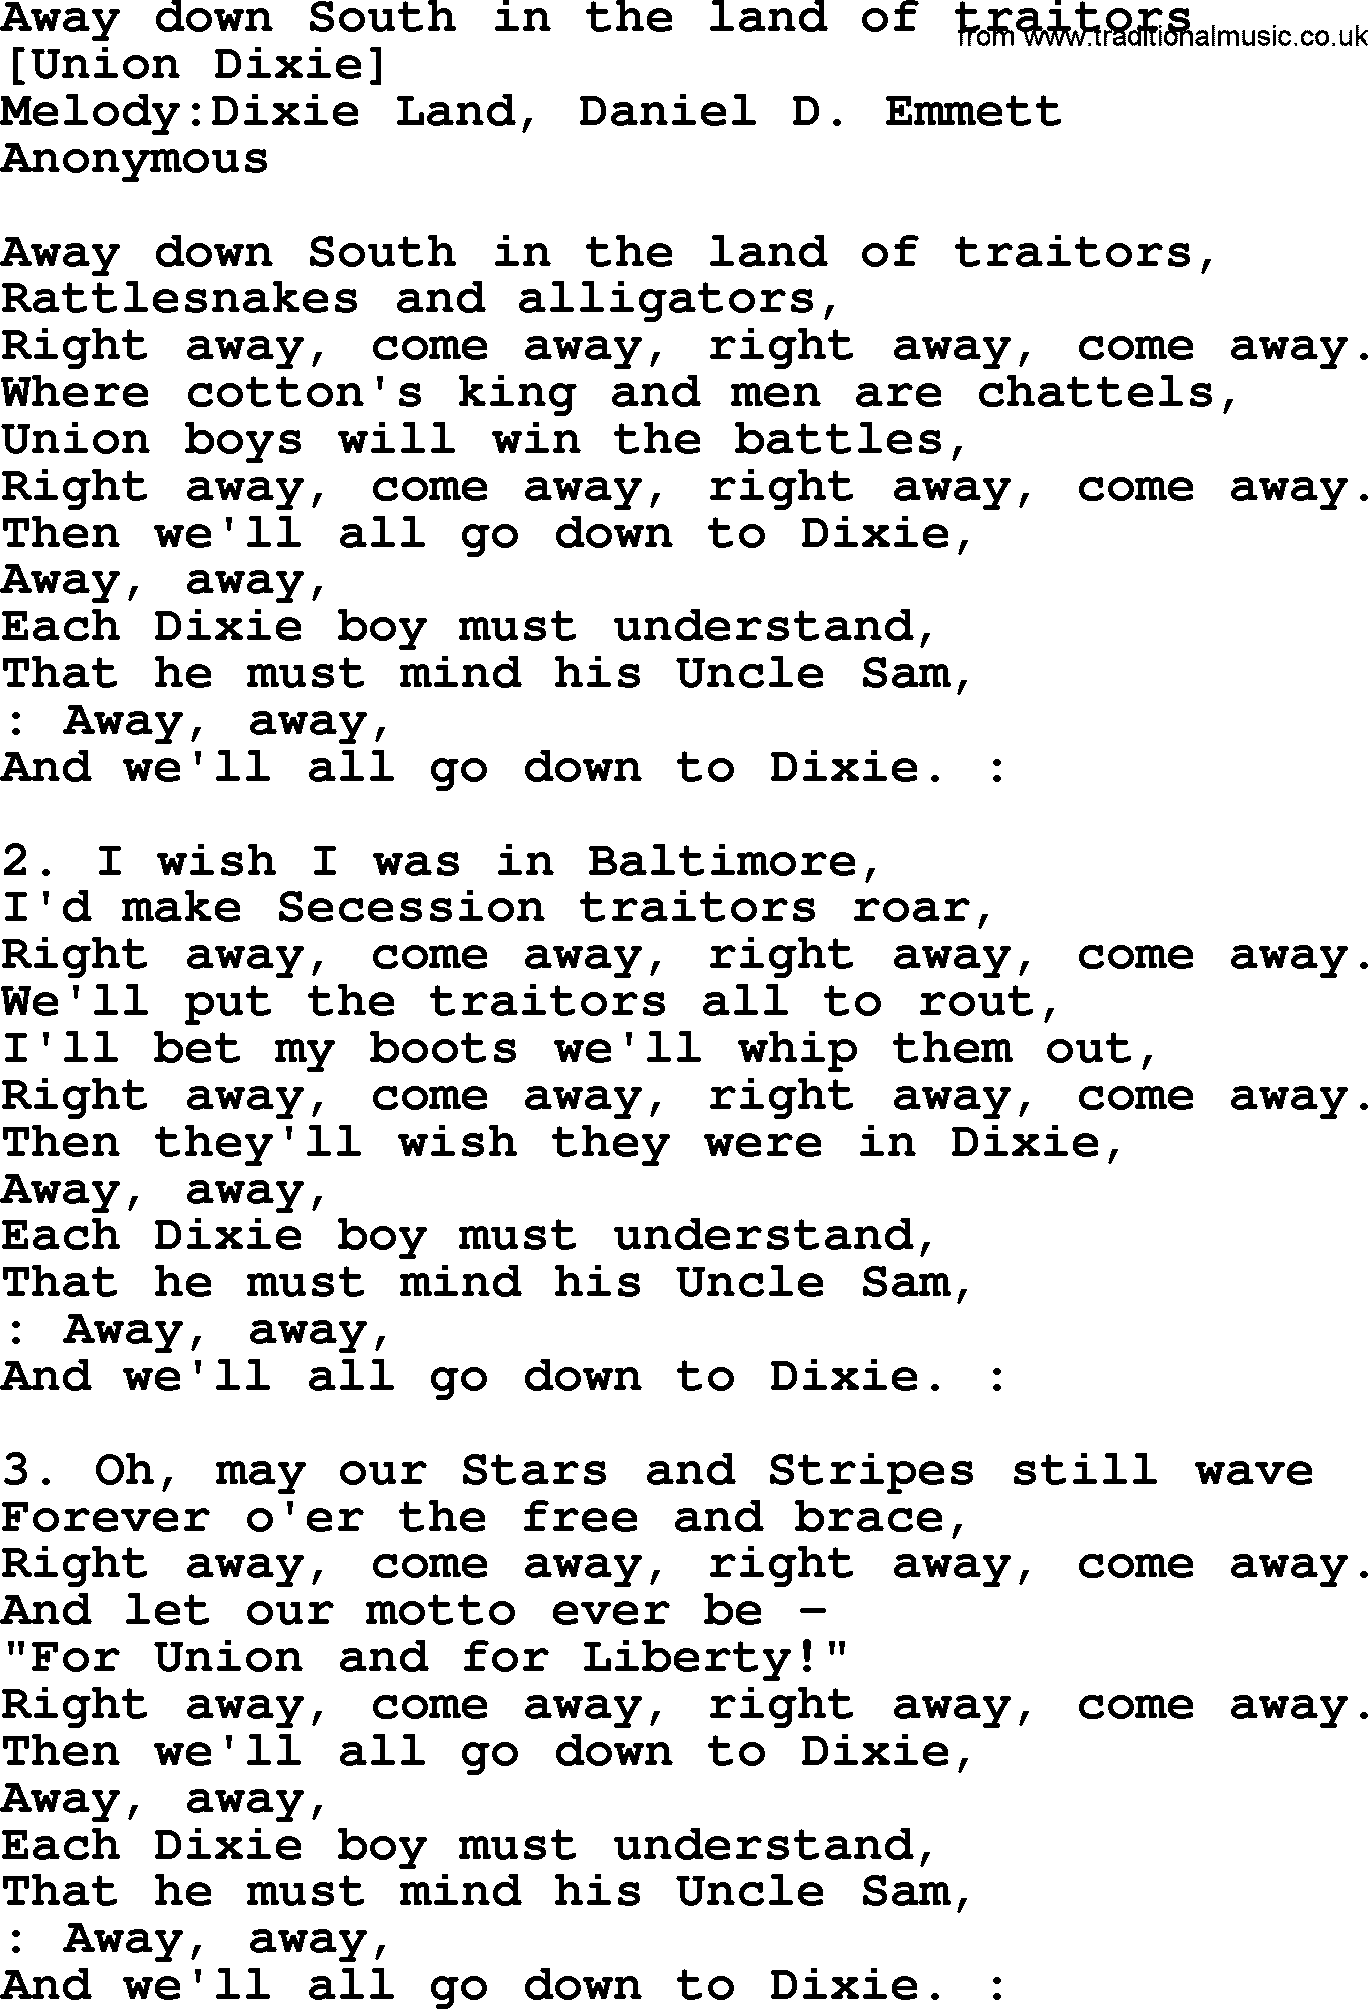 Old American Song: Away Down South In The Land Of Traitors, lyrics